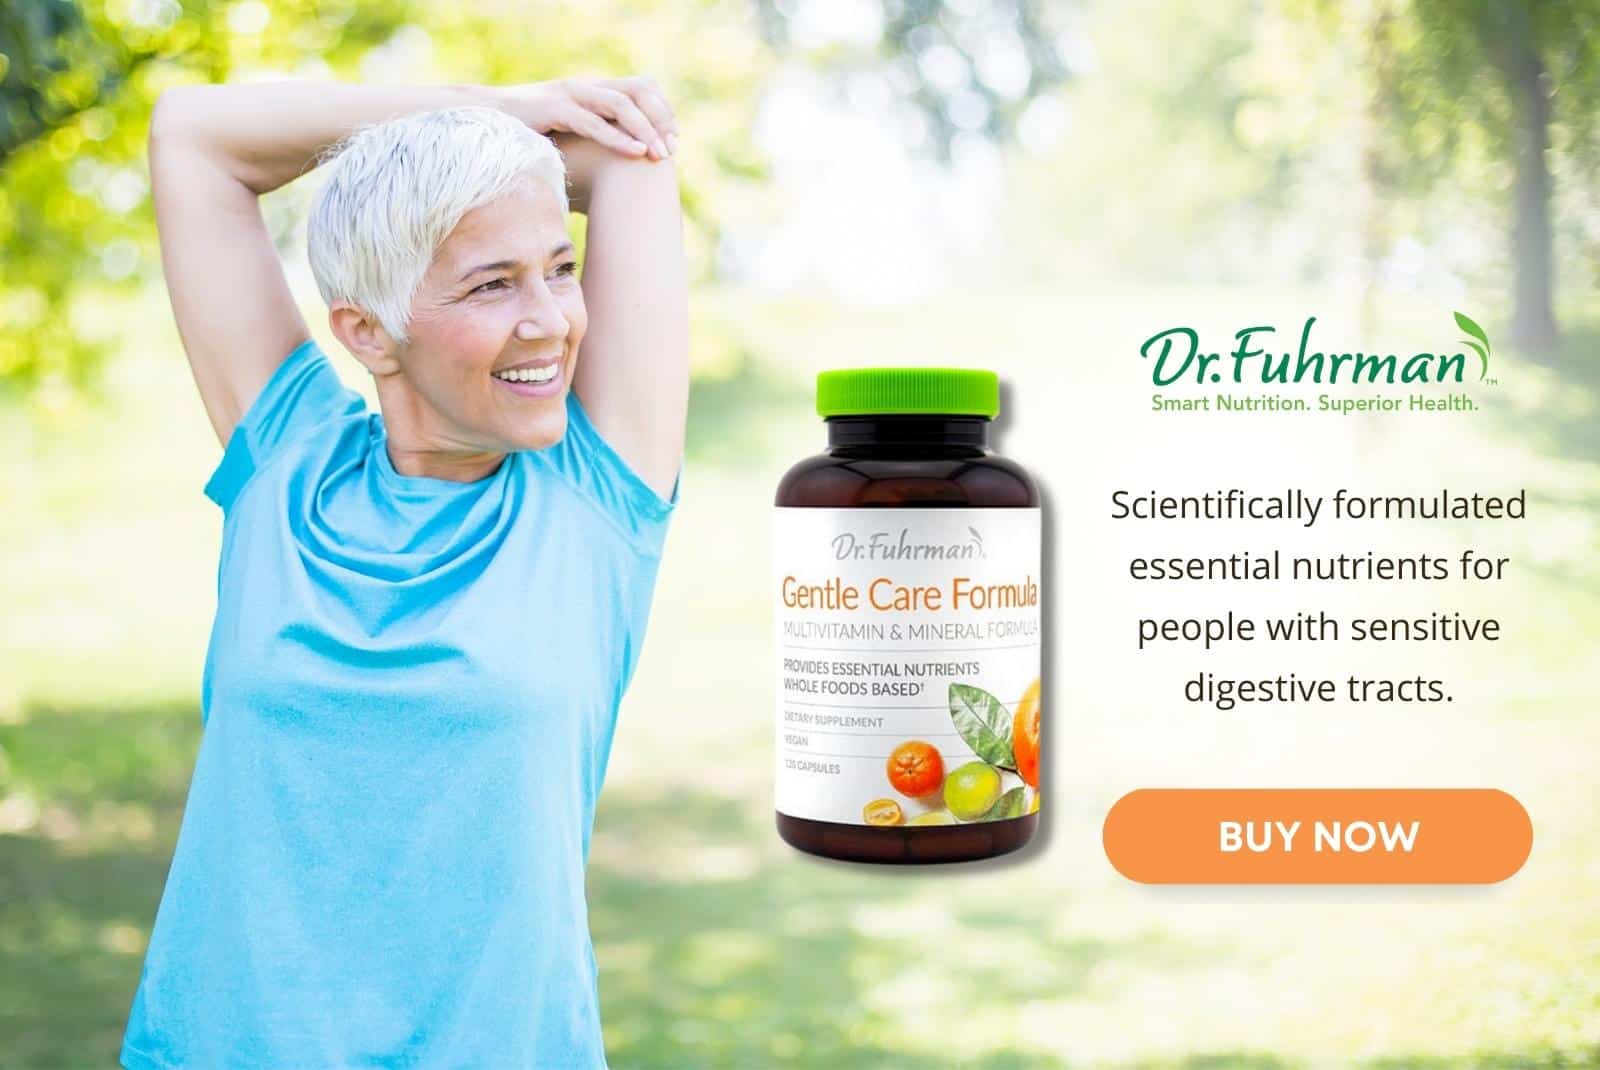 Click here to get Dr. Fuhrman's Gentle Care Formula